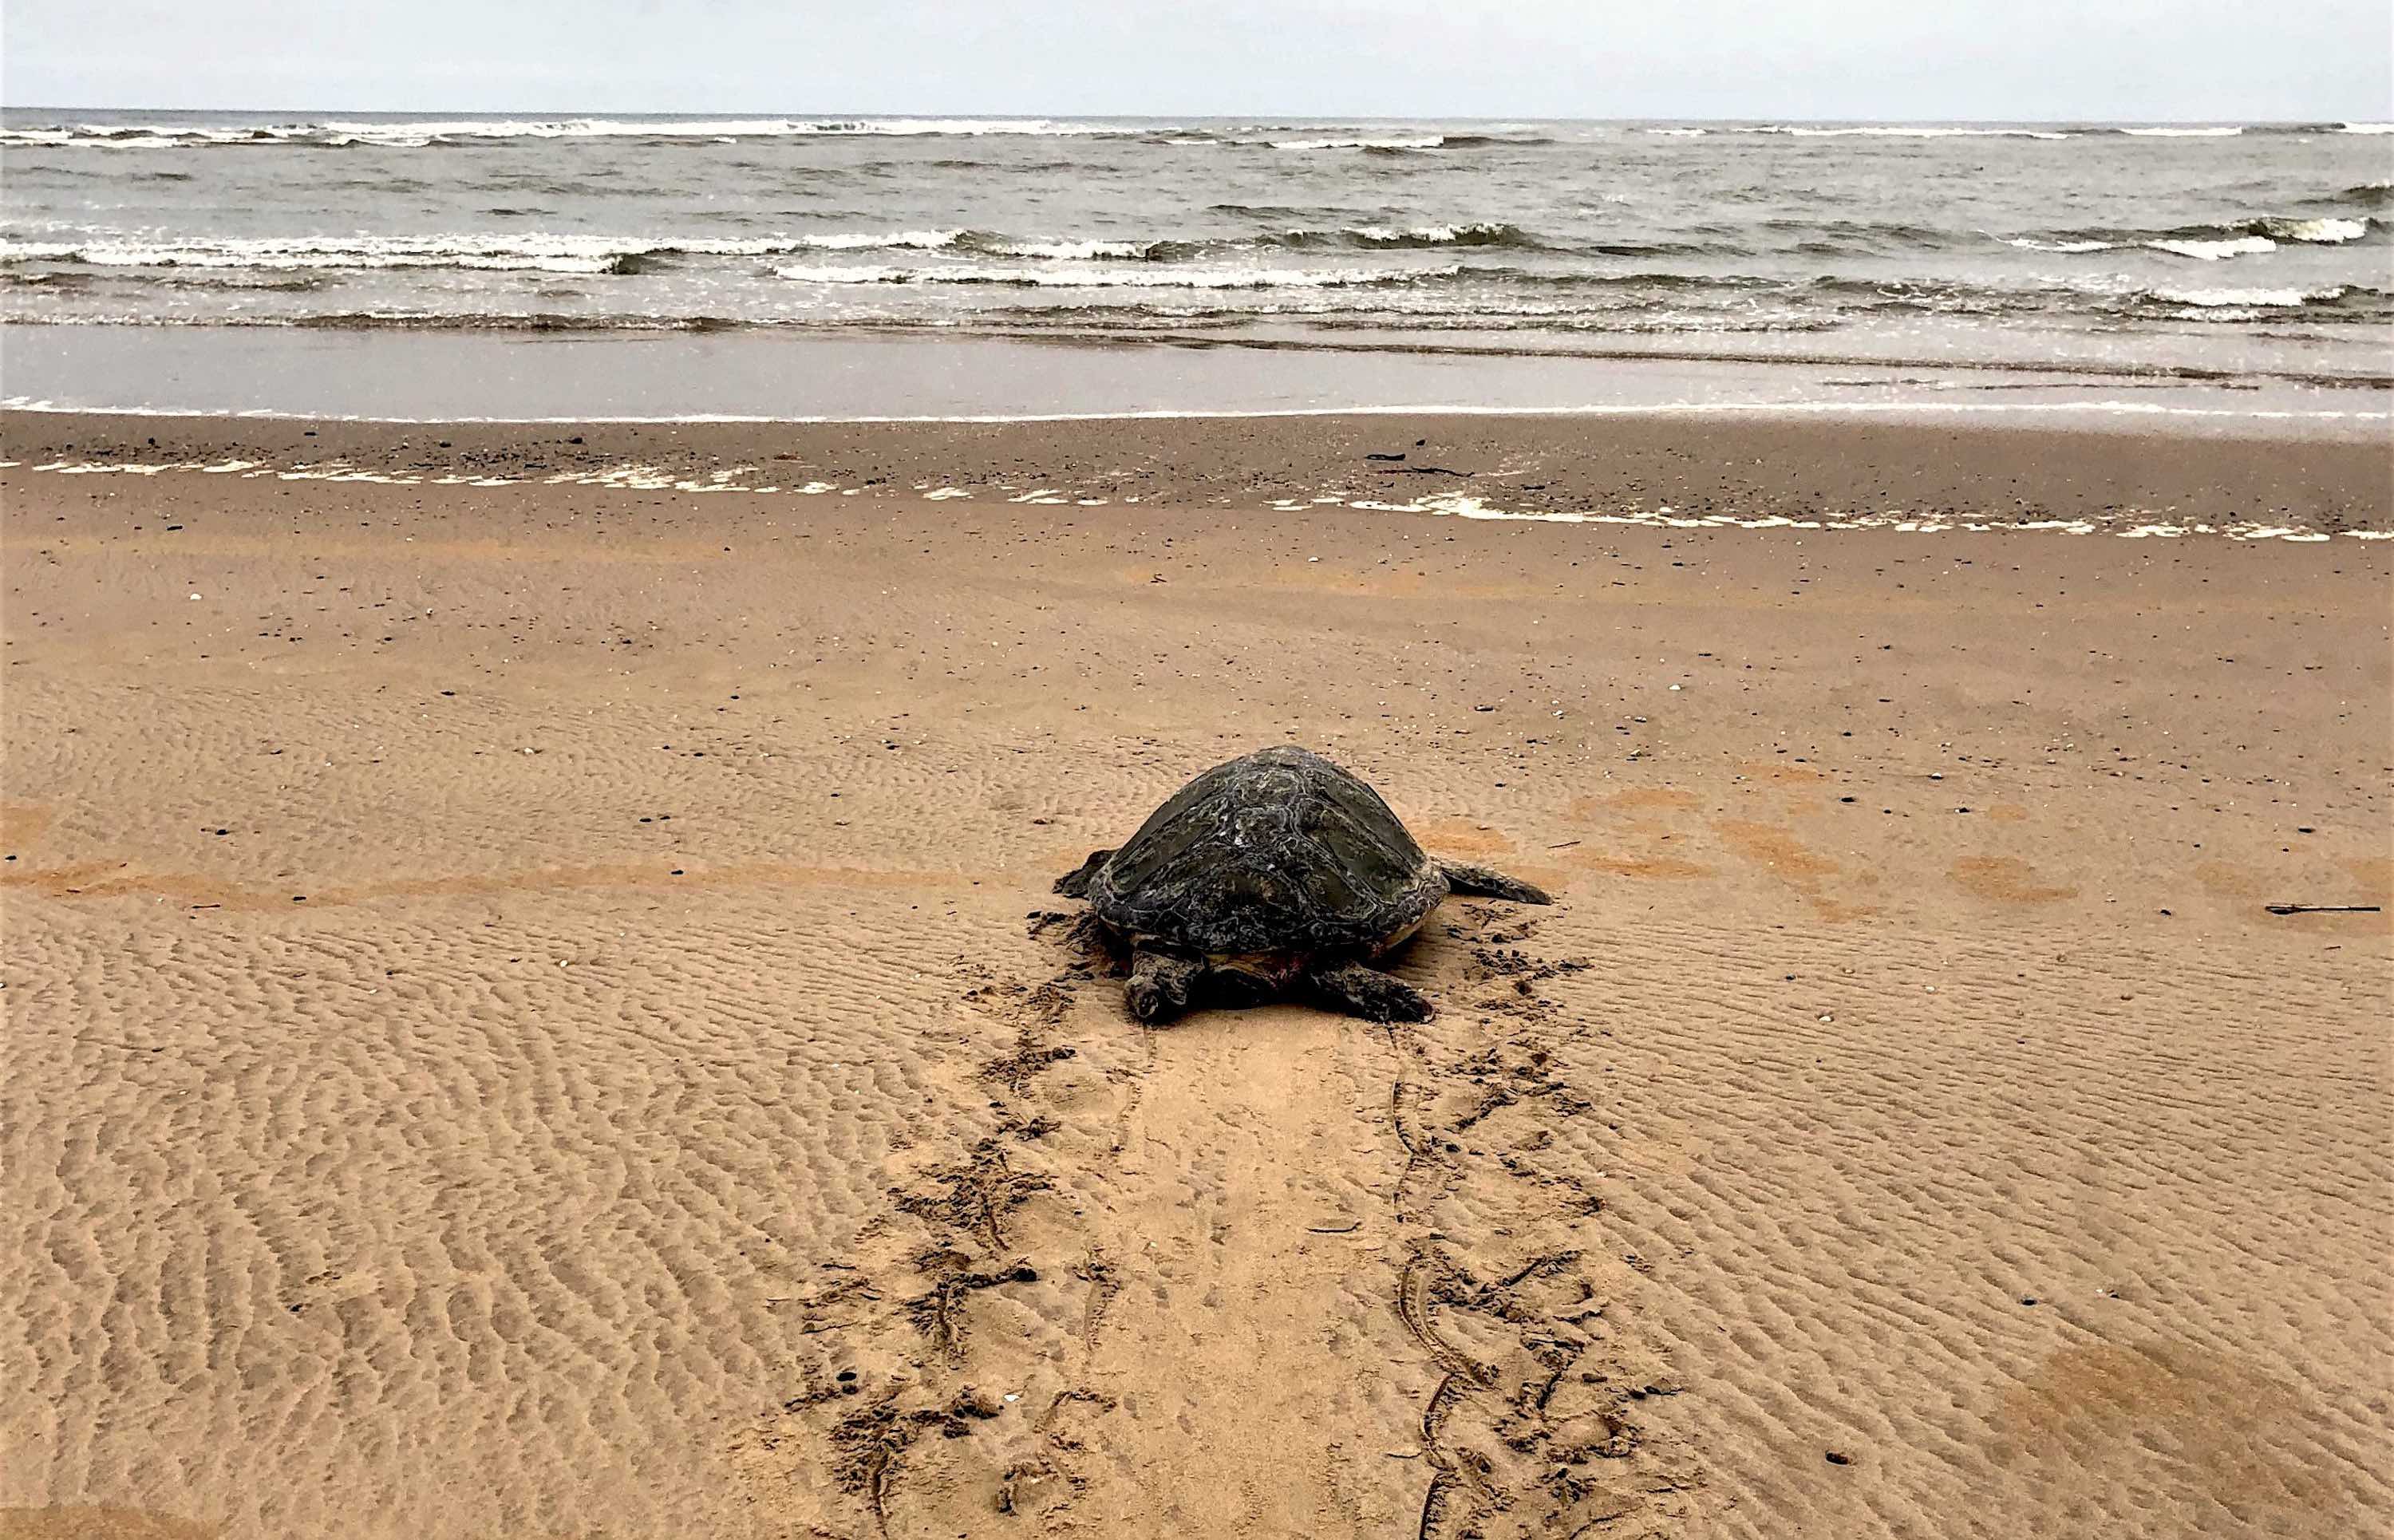 A green turtle heads back to the ocean, leaving a broad trail in the sand behind it.